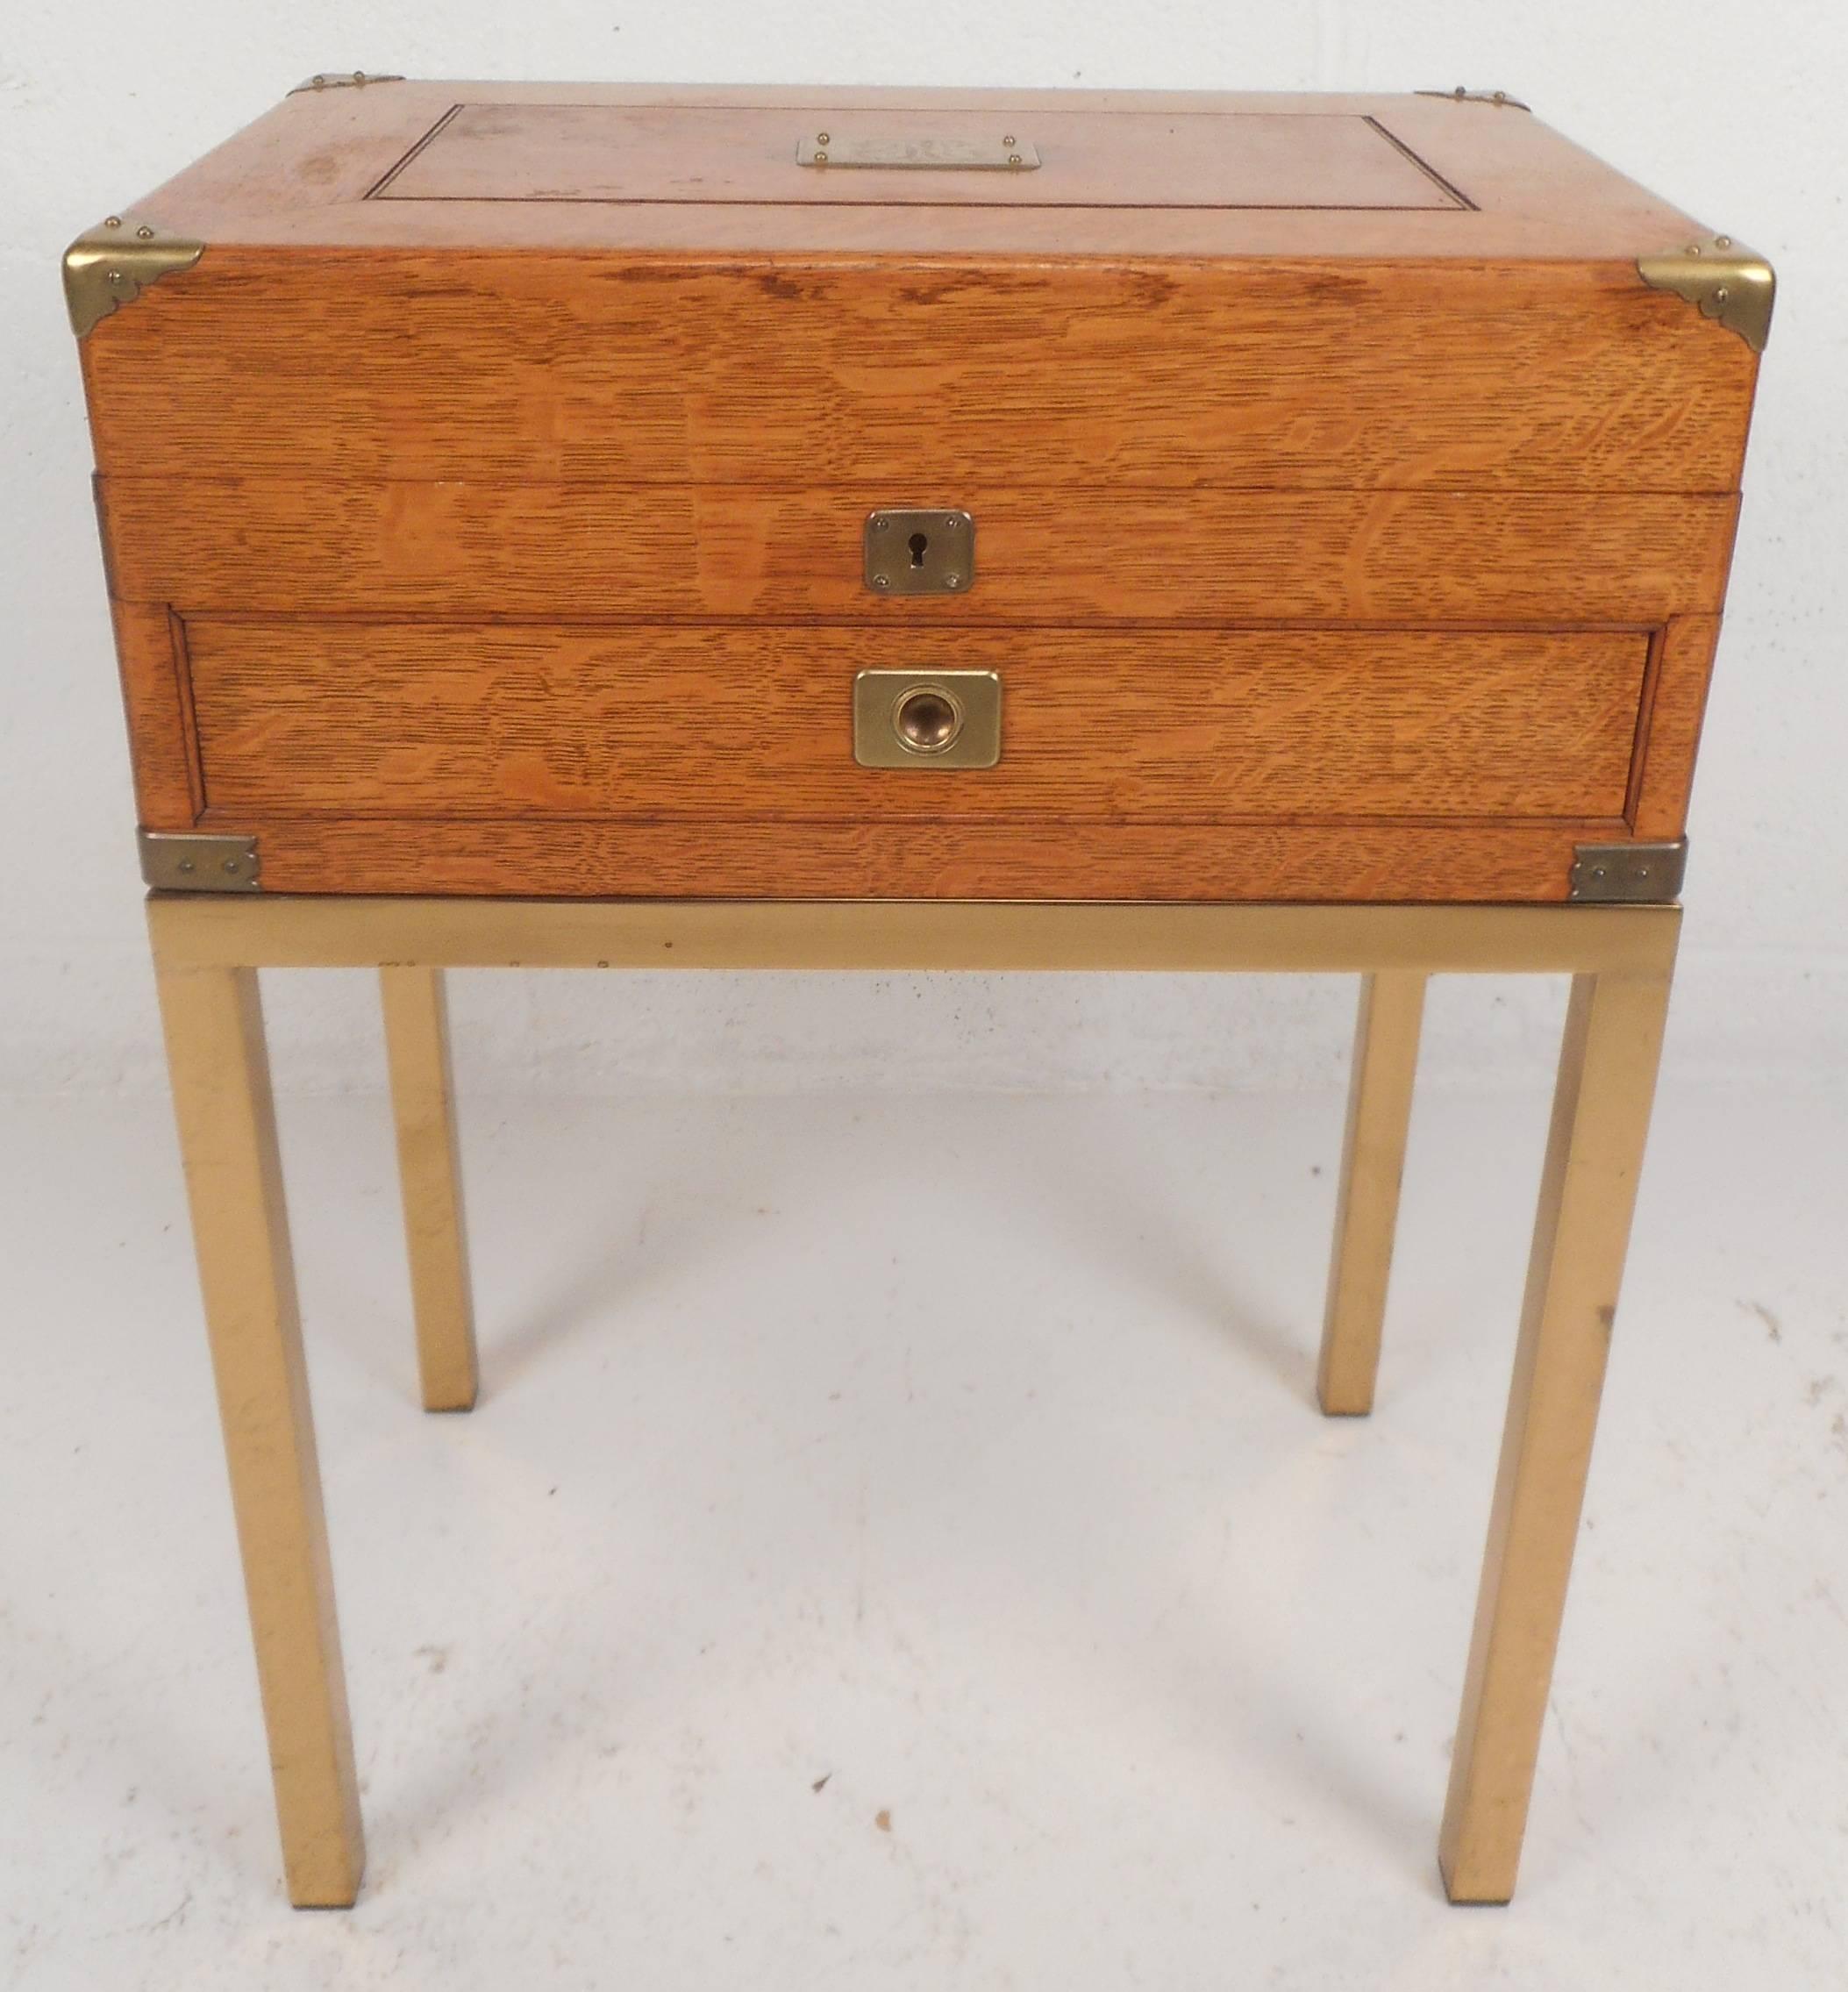 This elegant vintage modern Campaign style stand features intricate brass detail as well as four sturdy brass legs. Unique design has a single drawer and a lift up top for storage. This functional and stylish piece has sculpted handles on the sides